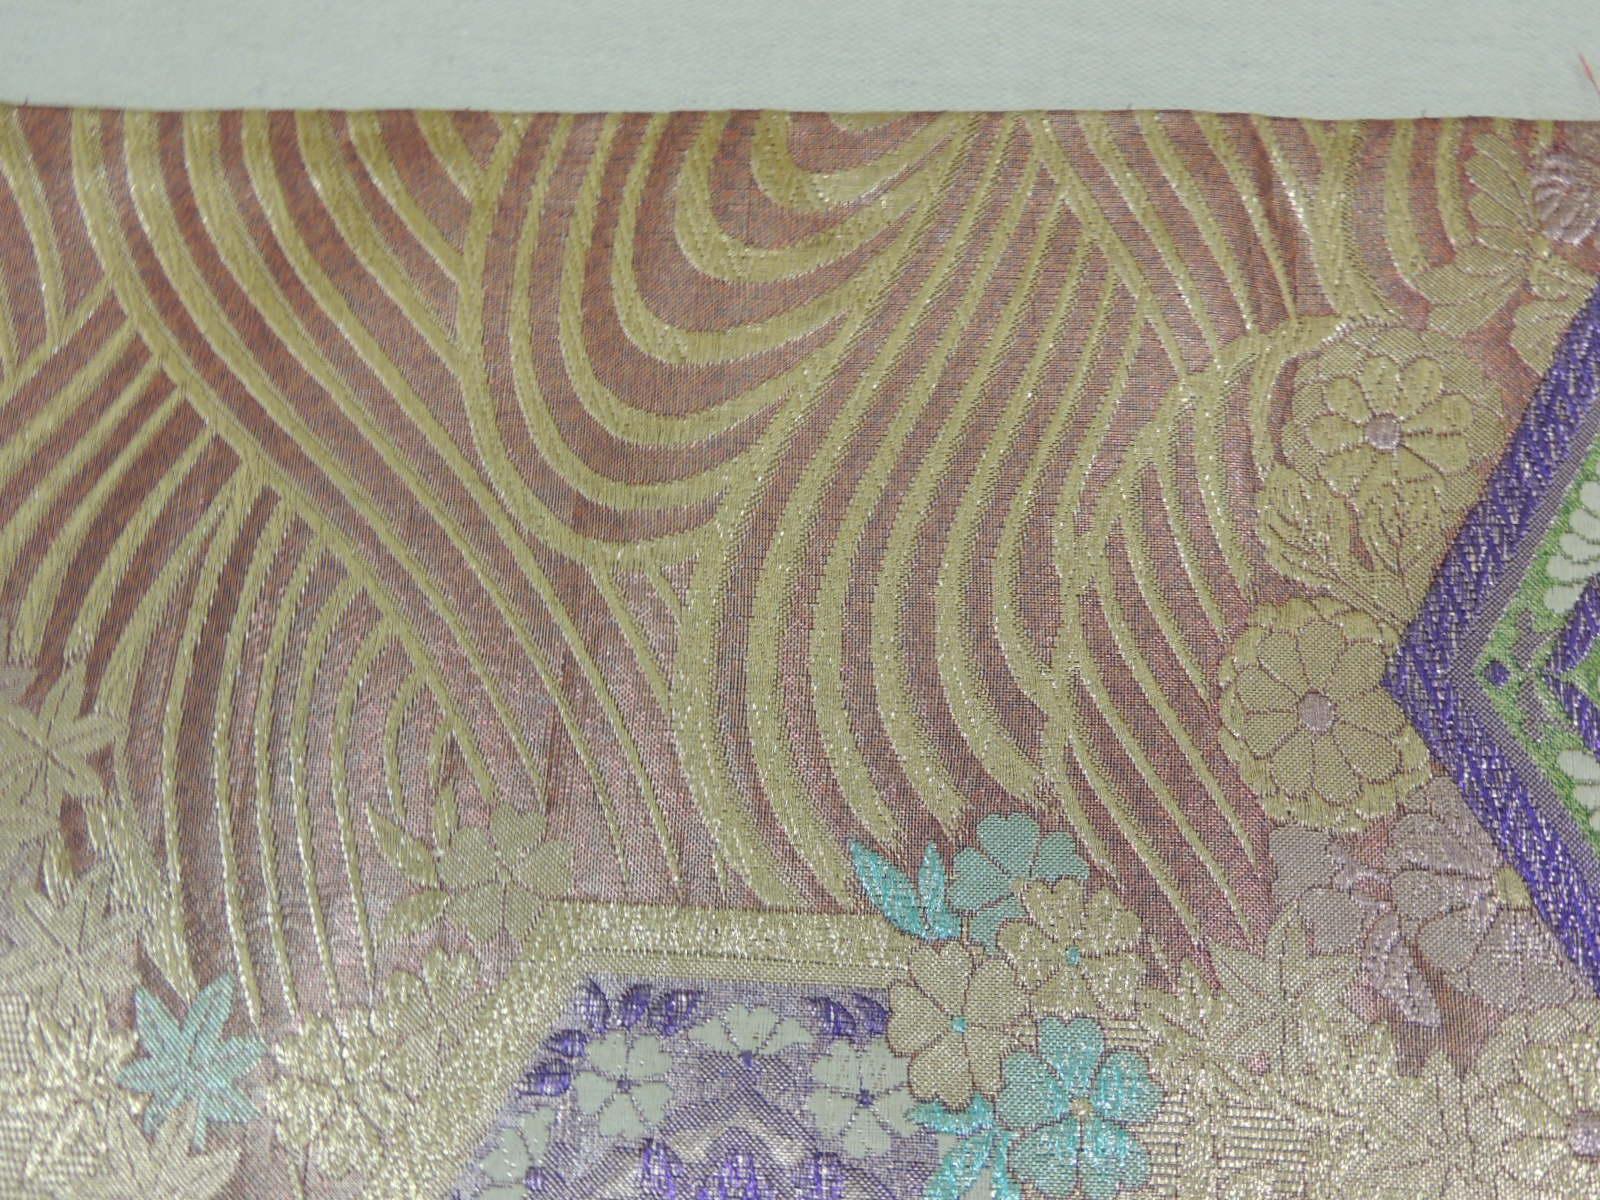 Long Golden Textured Woven Obi Textile Depicting Flowers in Bloom 5